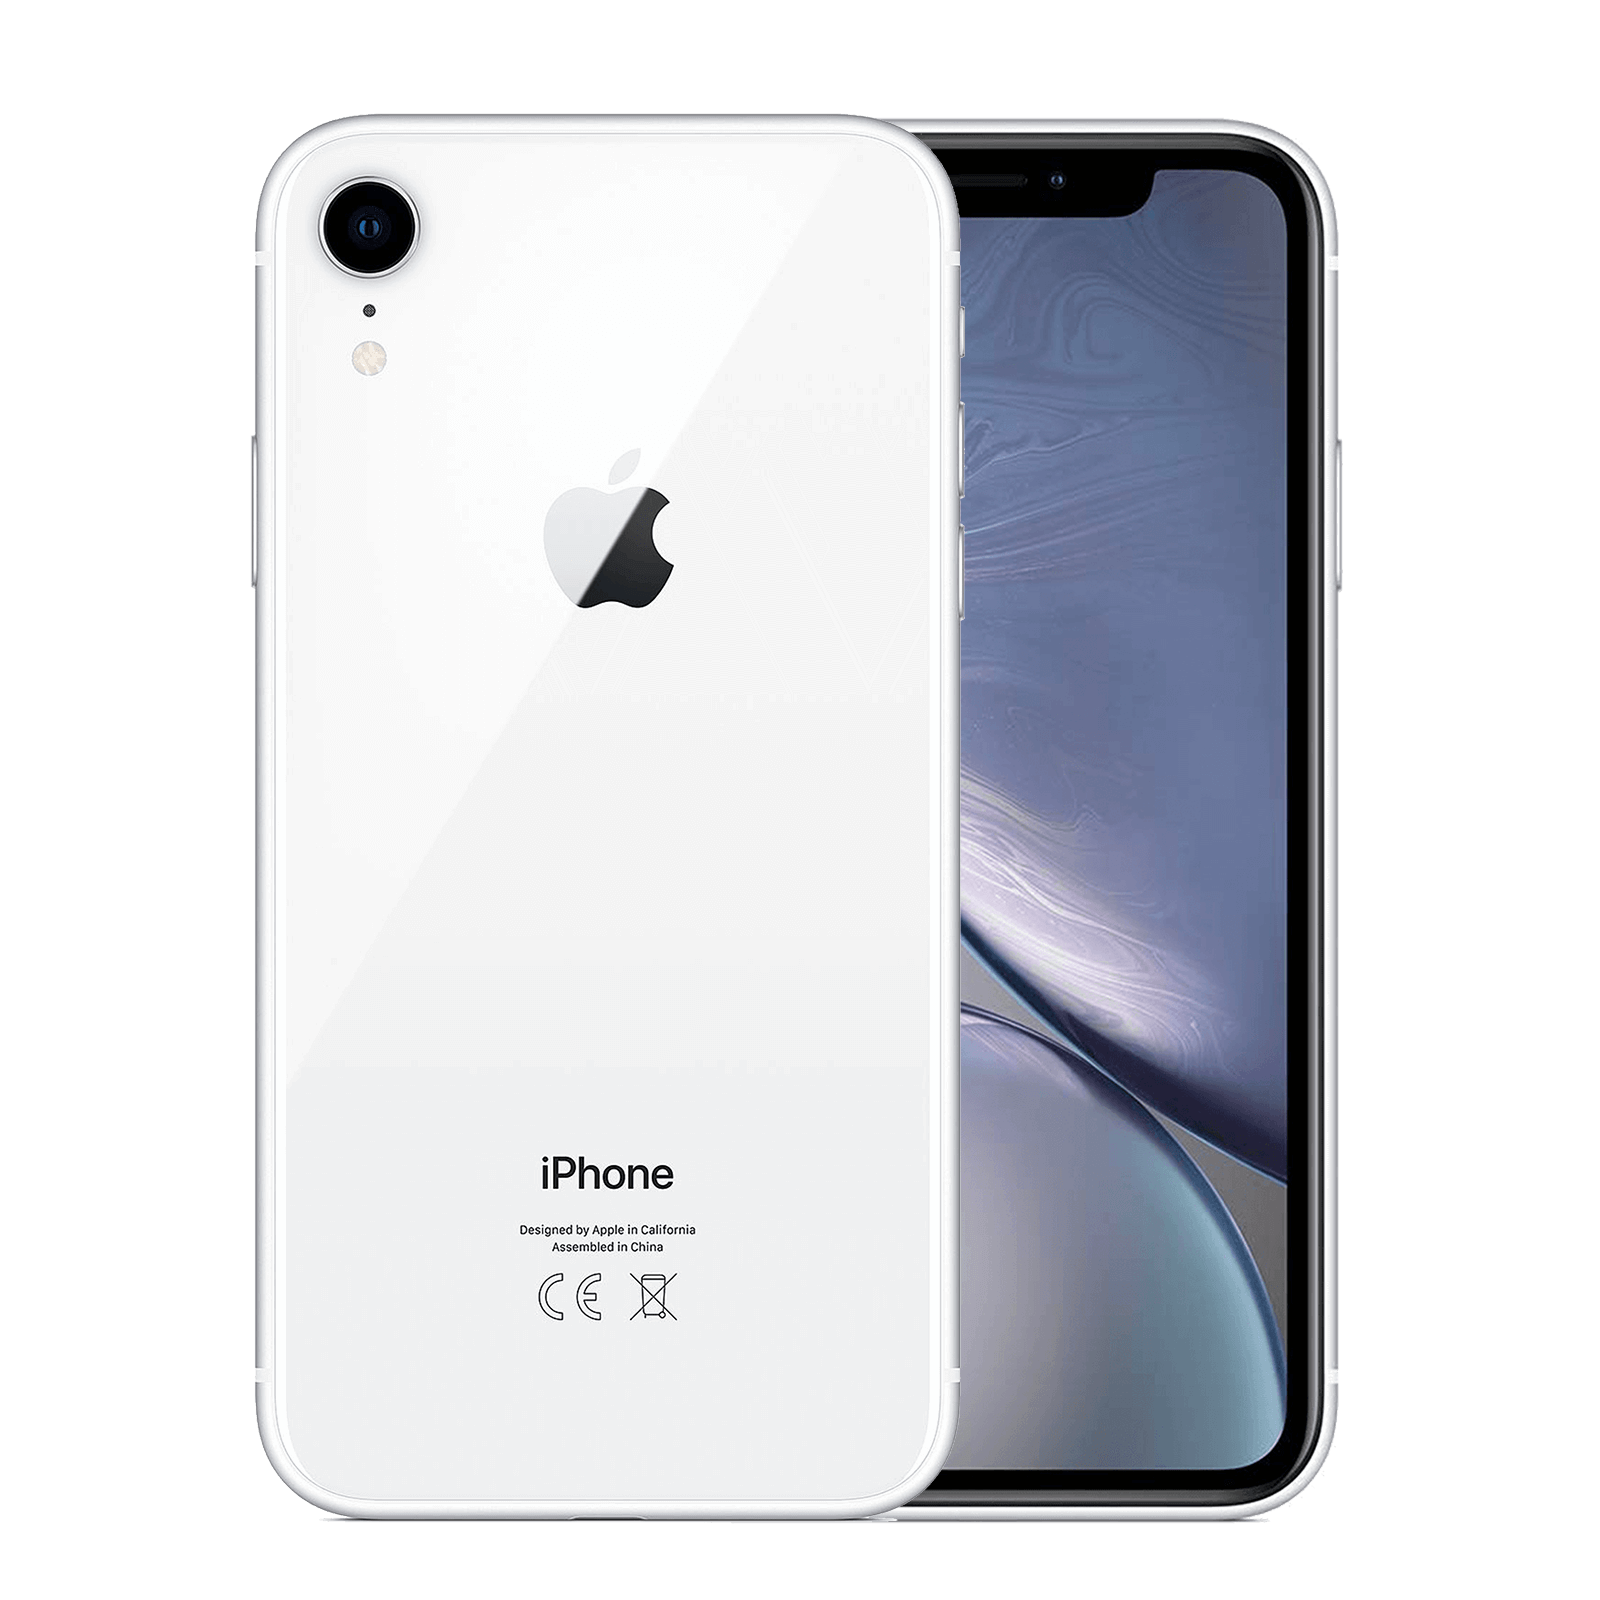 Apple iPhone XR 256GB White Very Good - AT&T